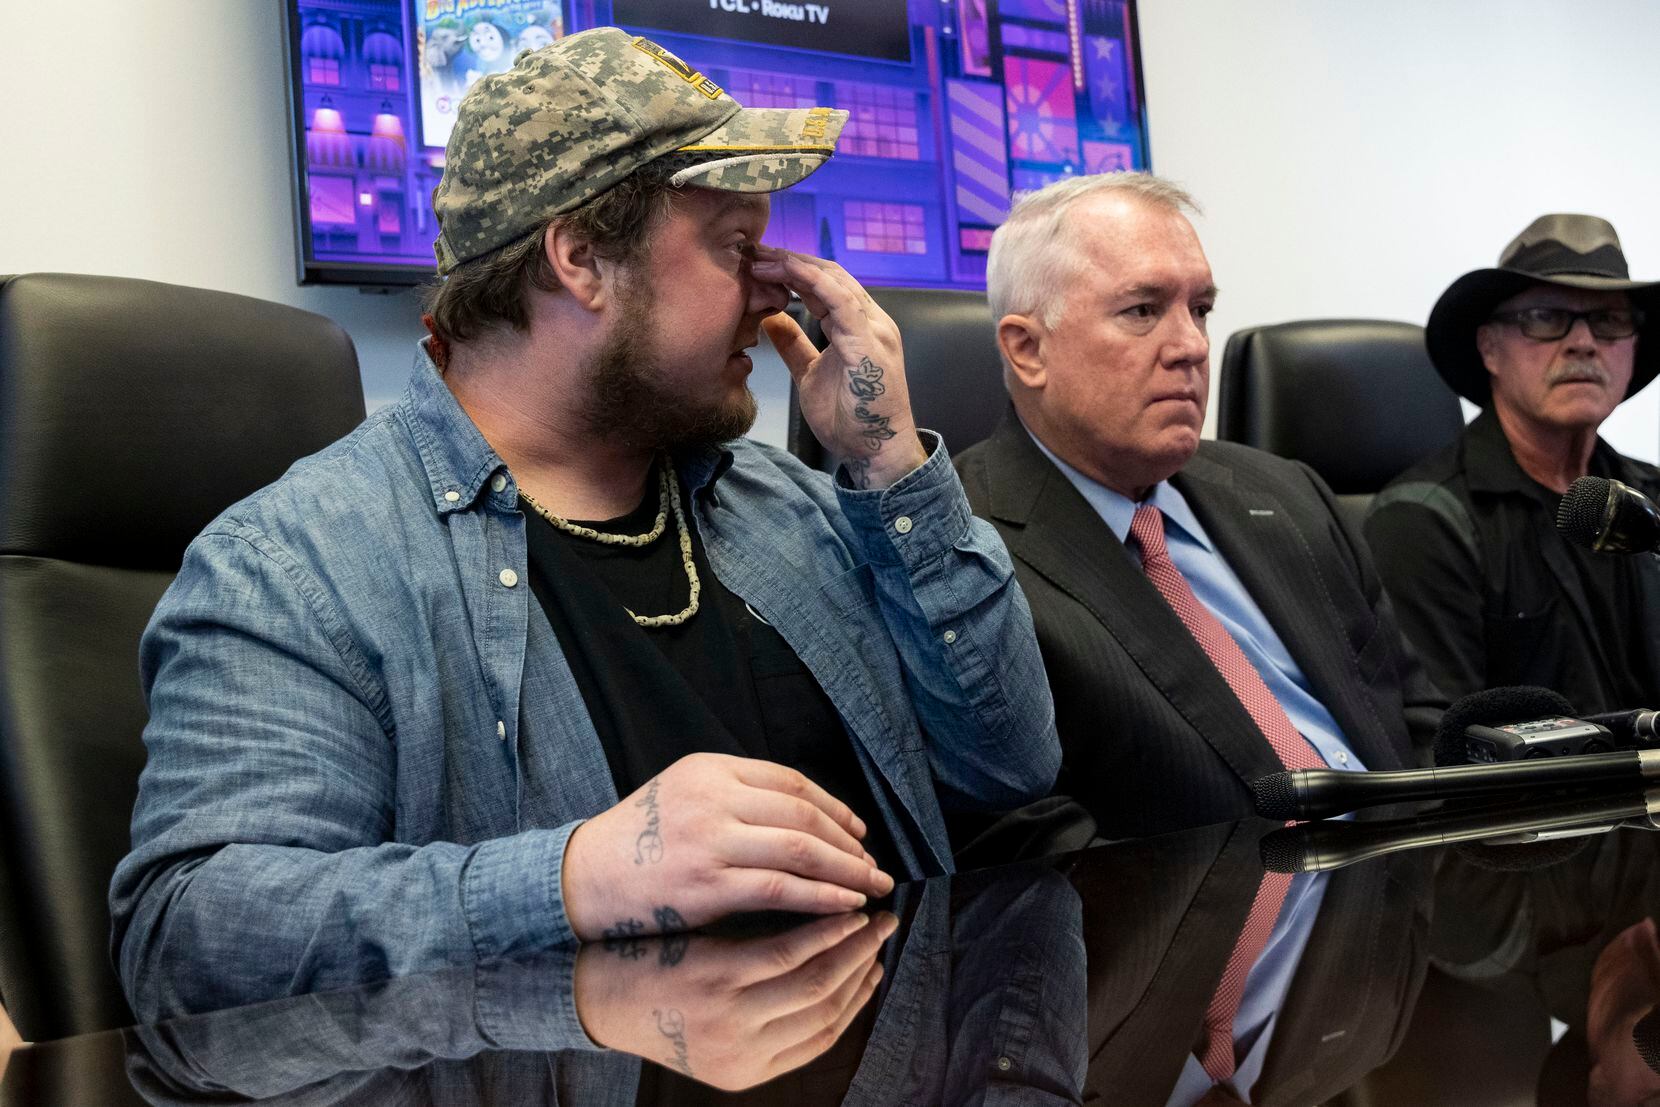 Kyle Vess (left), the homeless man who was kicked by Dallas Fire-Rescue paramedic Brad Cox in 2019, described the injuries to his face as his attorney George Milner III (center) and father Kevin Vess listened on Wednesday, Oct. 27, 2021, in Dallas. (Juan Figueroa/The Dallas Morning News)